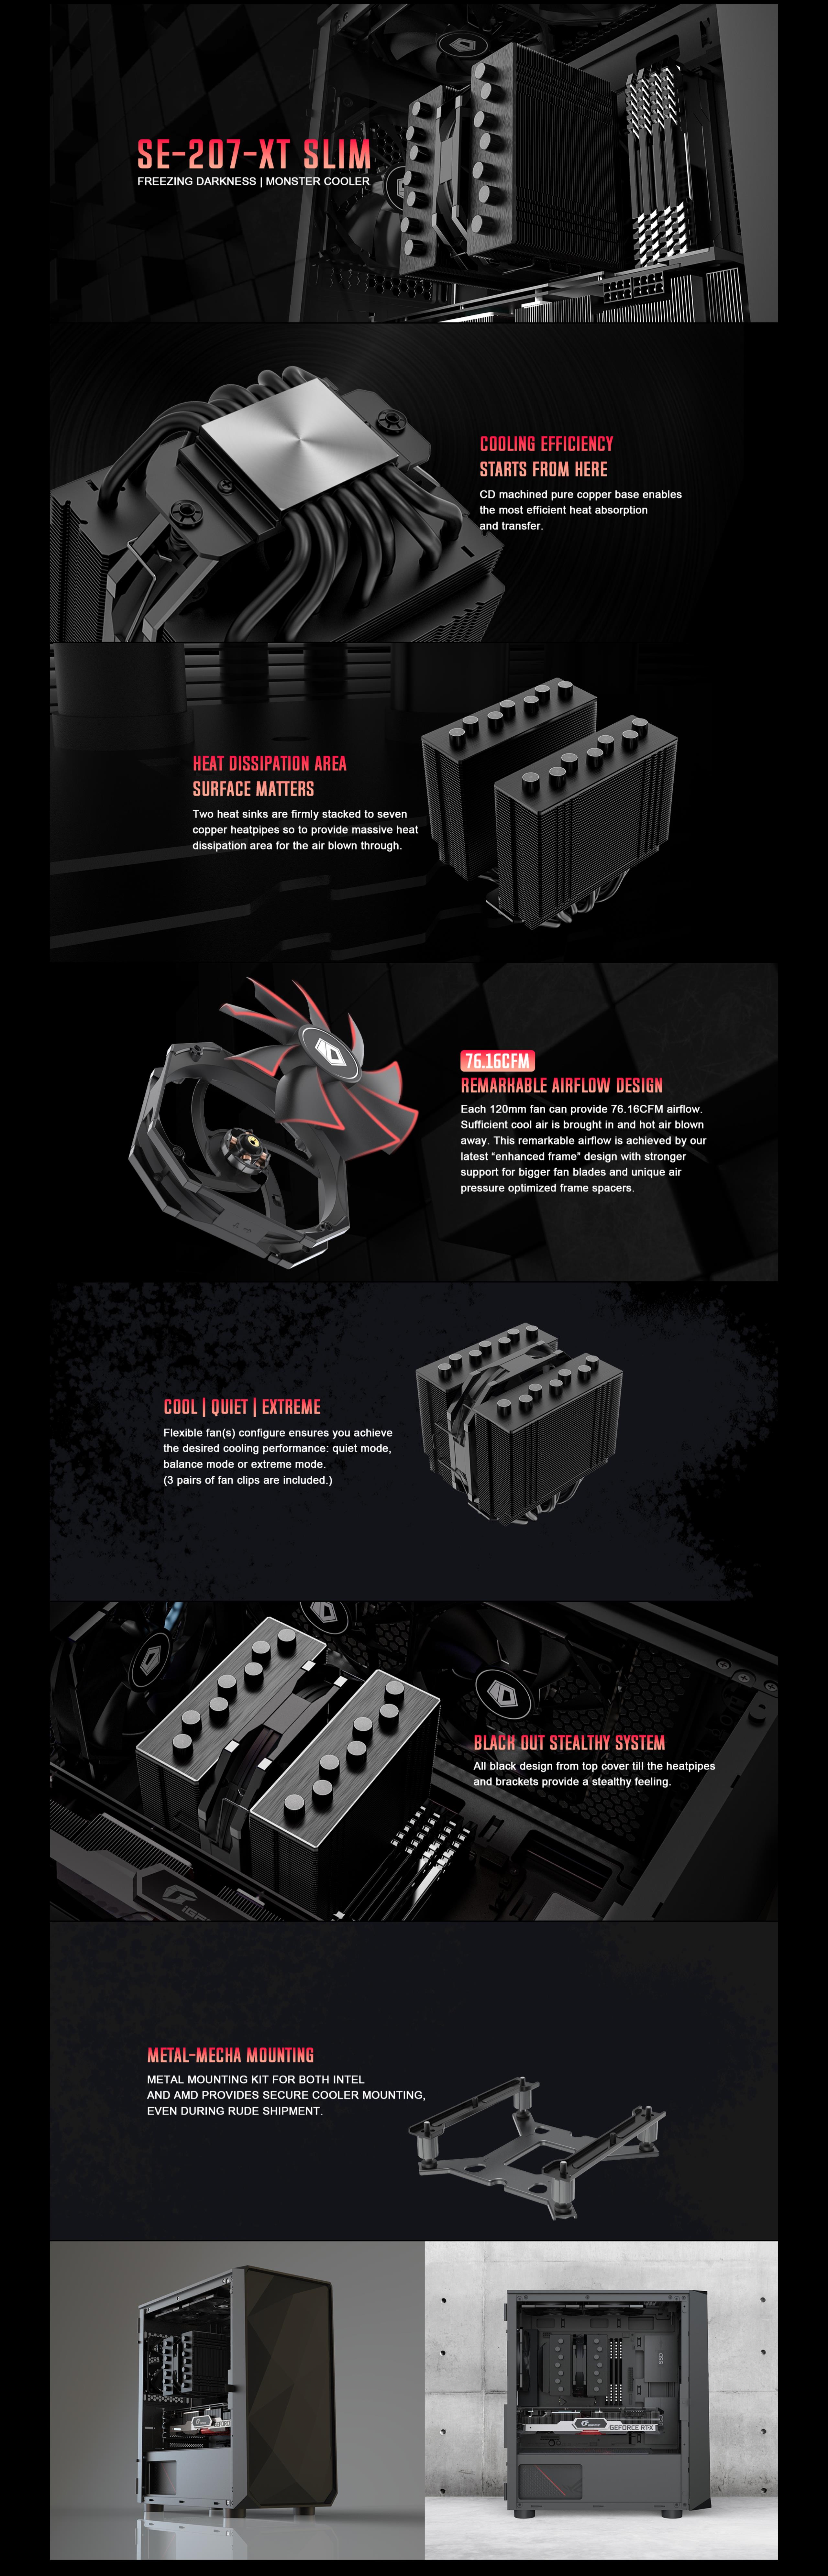 A large marketing image providing additional information about the product ID-COOLING SE-207-XT Slim CPU Cooler - Additional alt info not provided